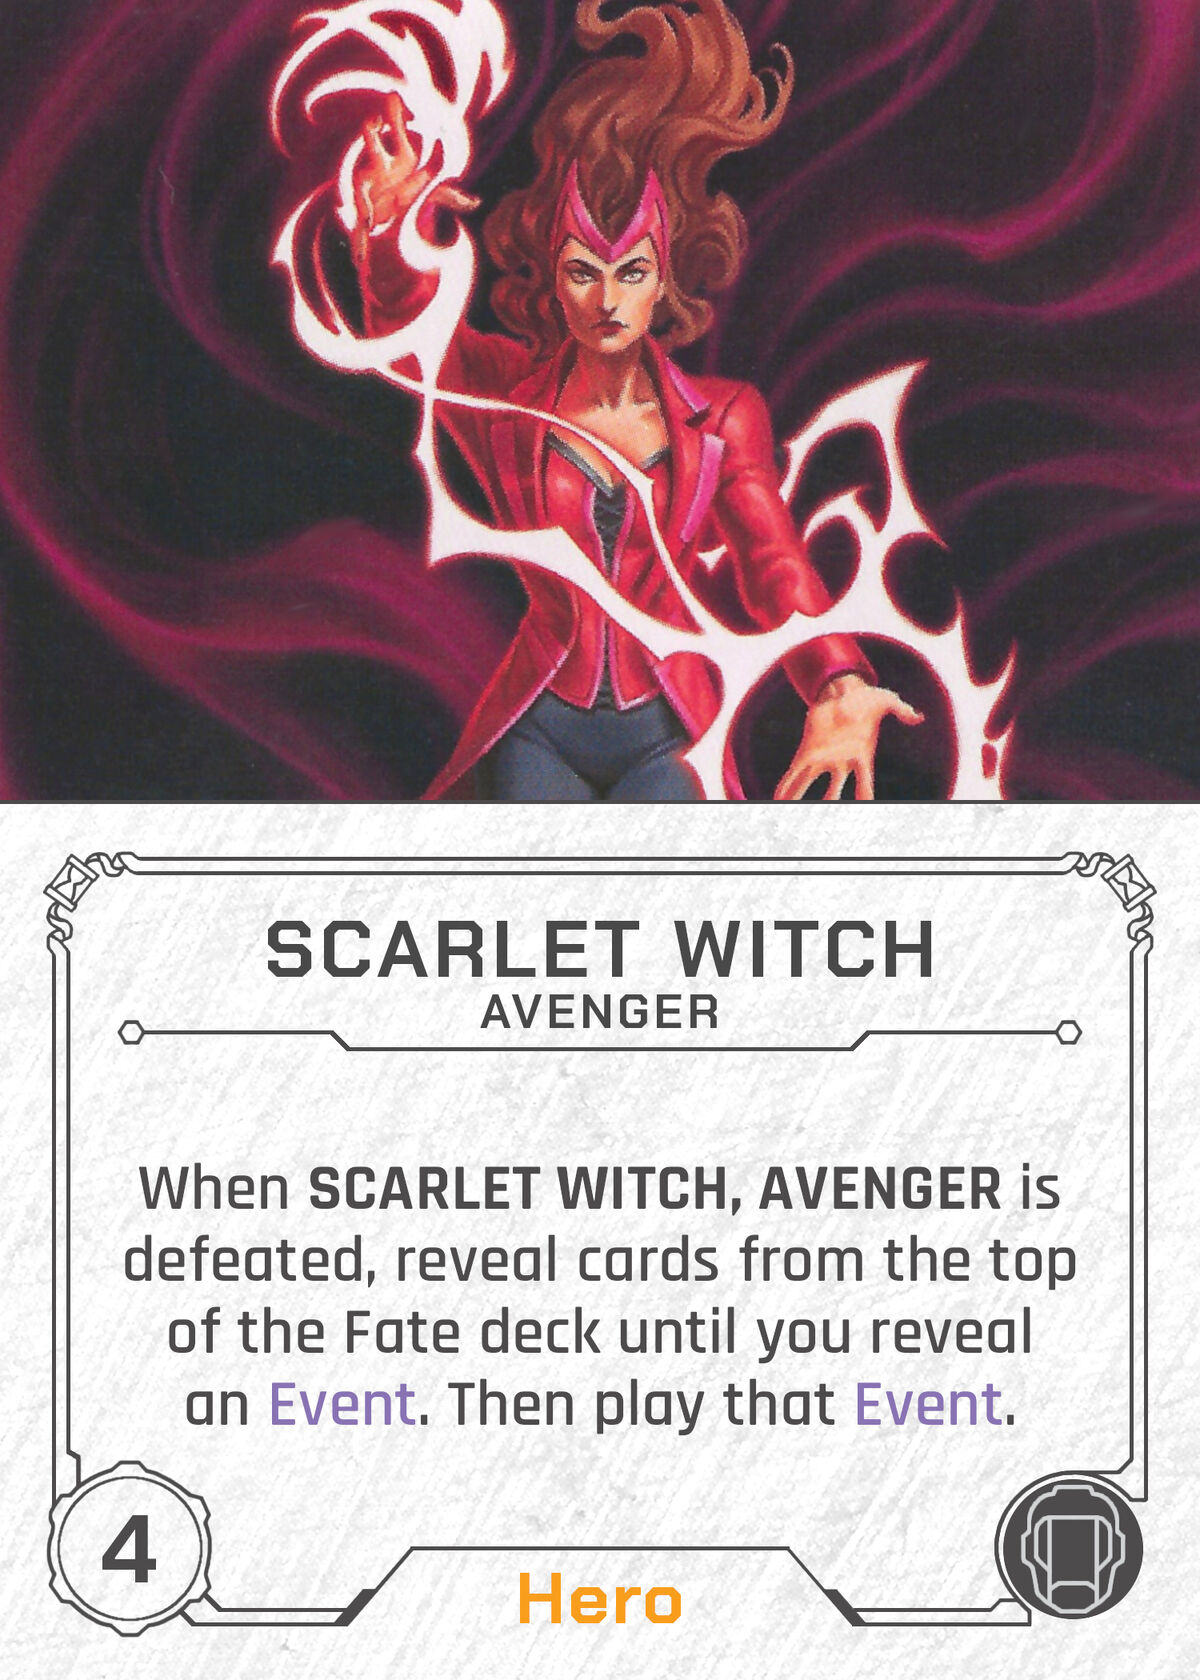 MARVEL VILLAINOUS Sacrifices Must Be Made EVENT FATE CARD 2020